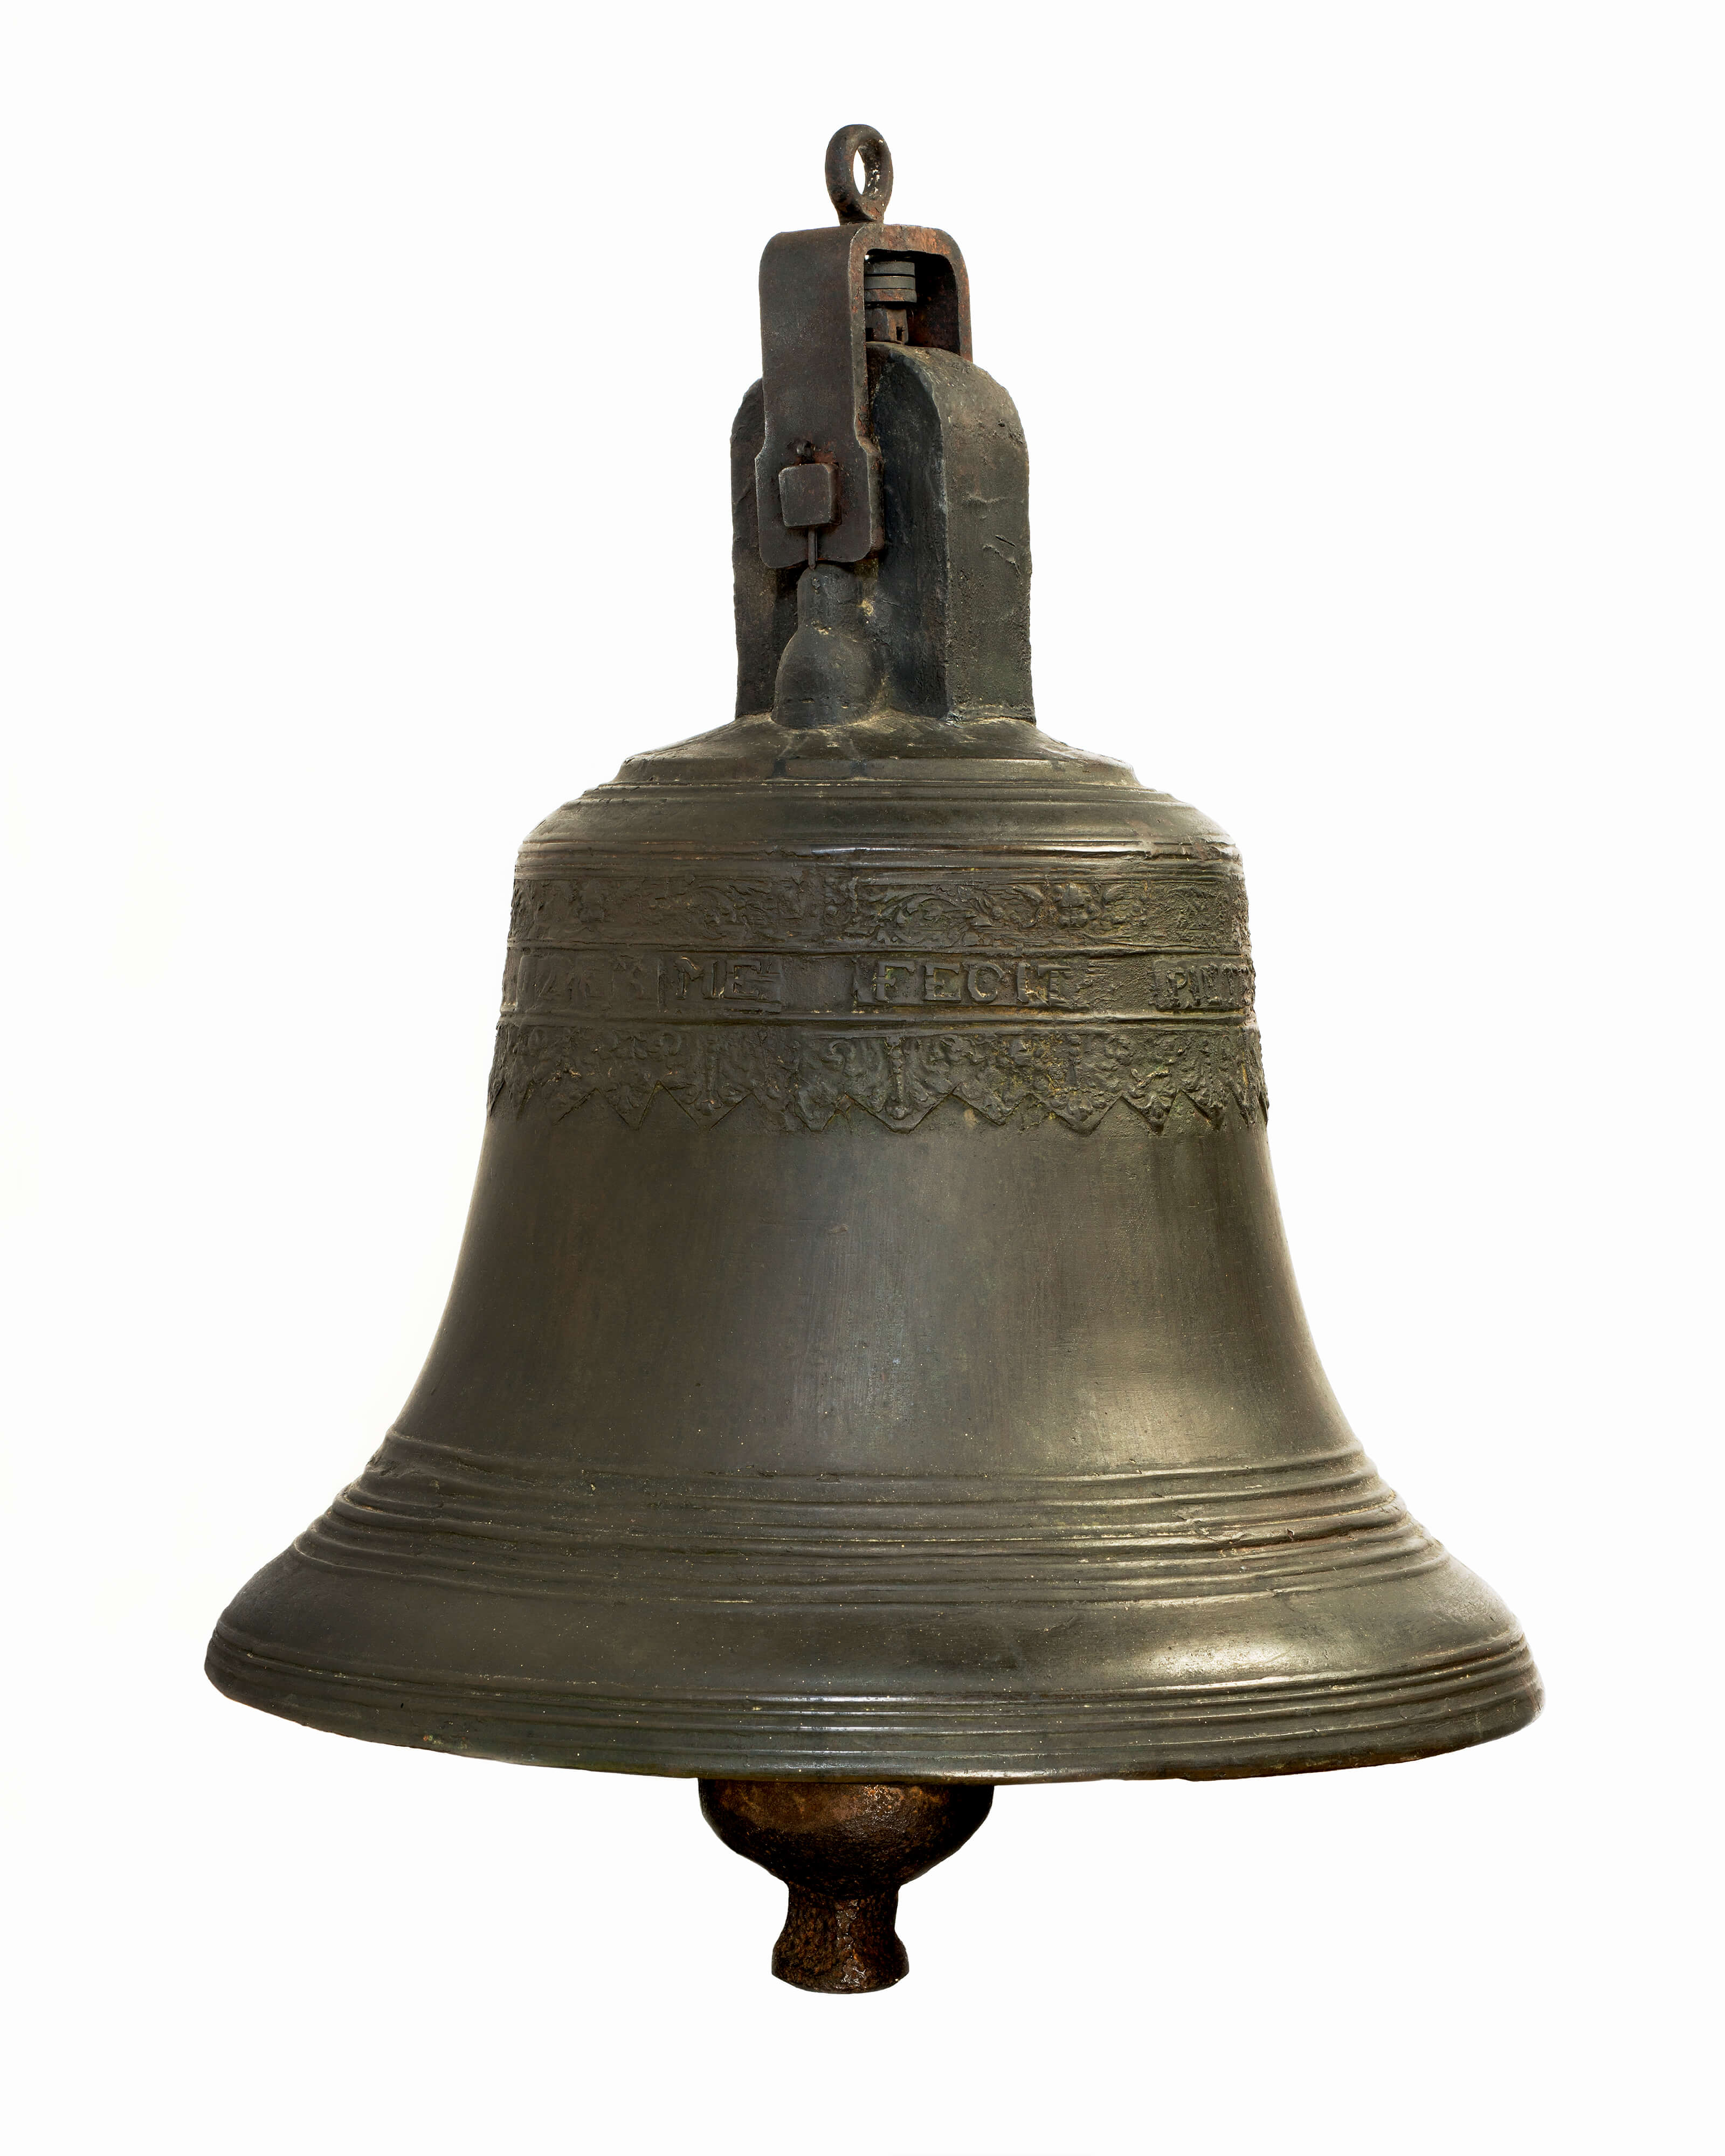 Authentic US Navy Bells and Commercial Ship Bells